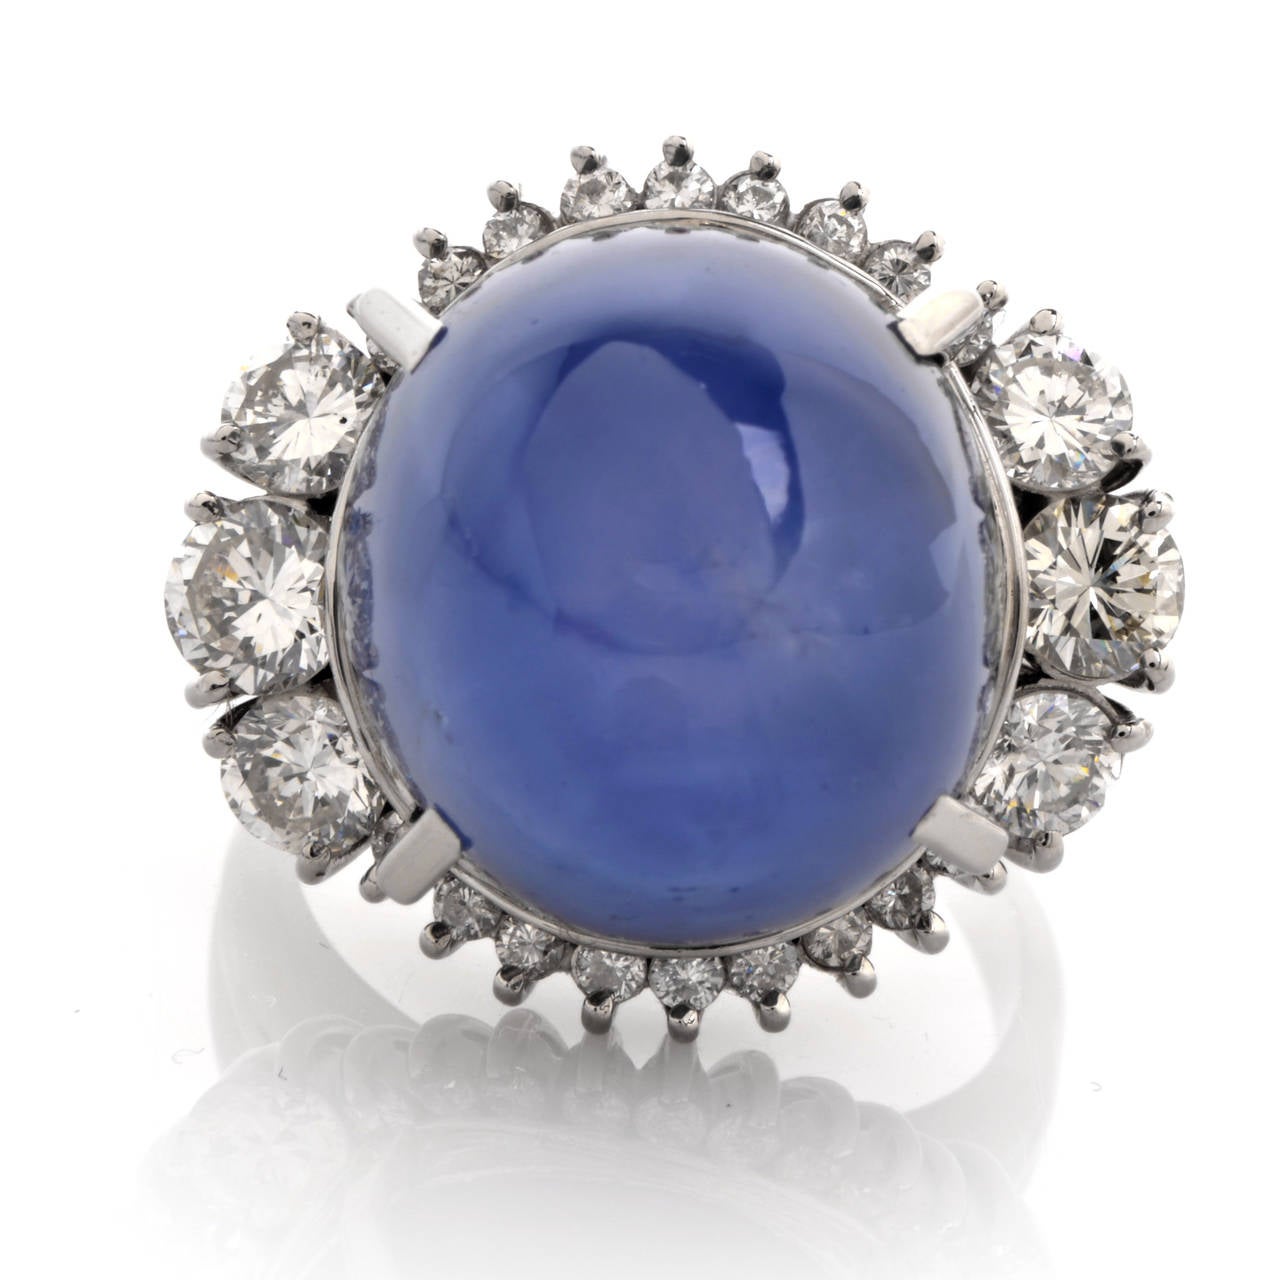 This captivating cocktail ring with a breath-taking genuine natural  No Heat star sapphire cabochon and genuine round-faceted diamonds is crafted in solid platinum and weighs approx. 18.4 grams. The fascinating star sapphire  cabochon of a